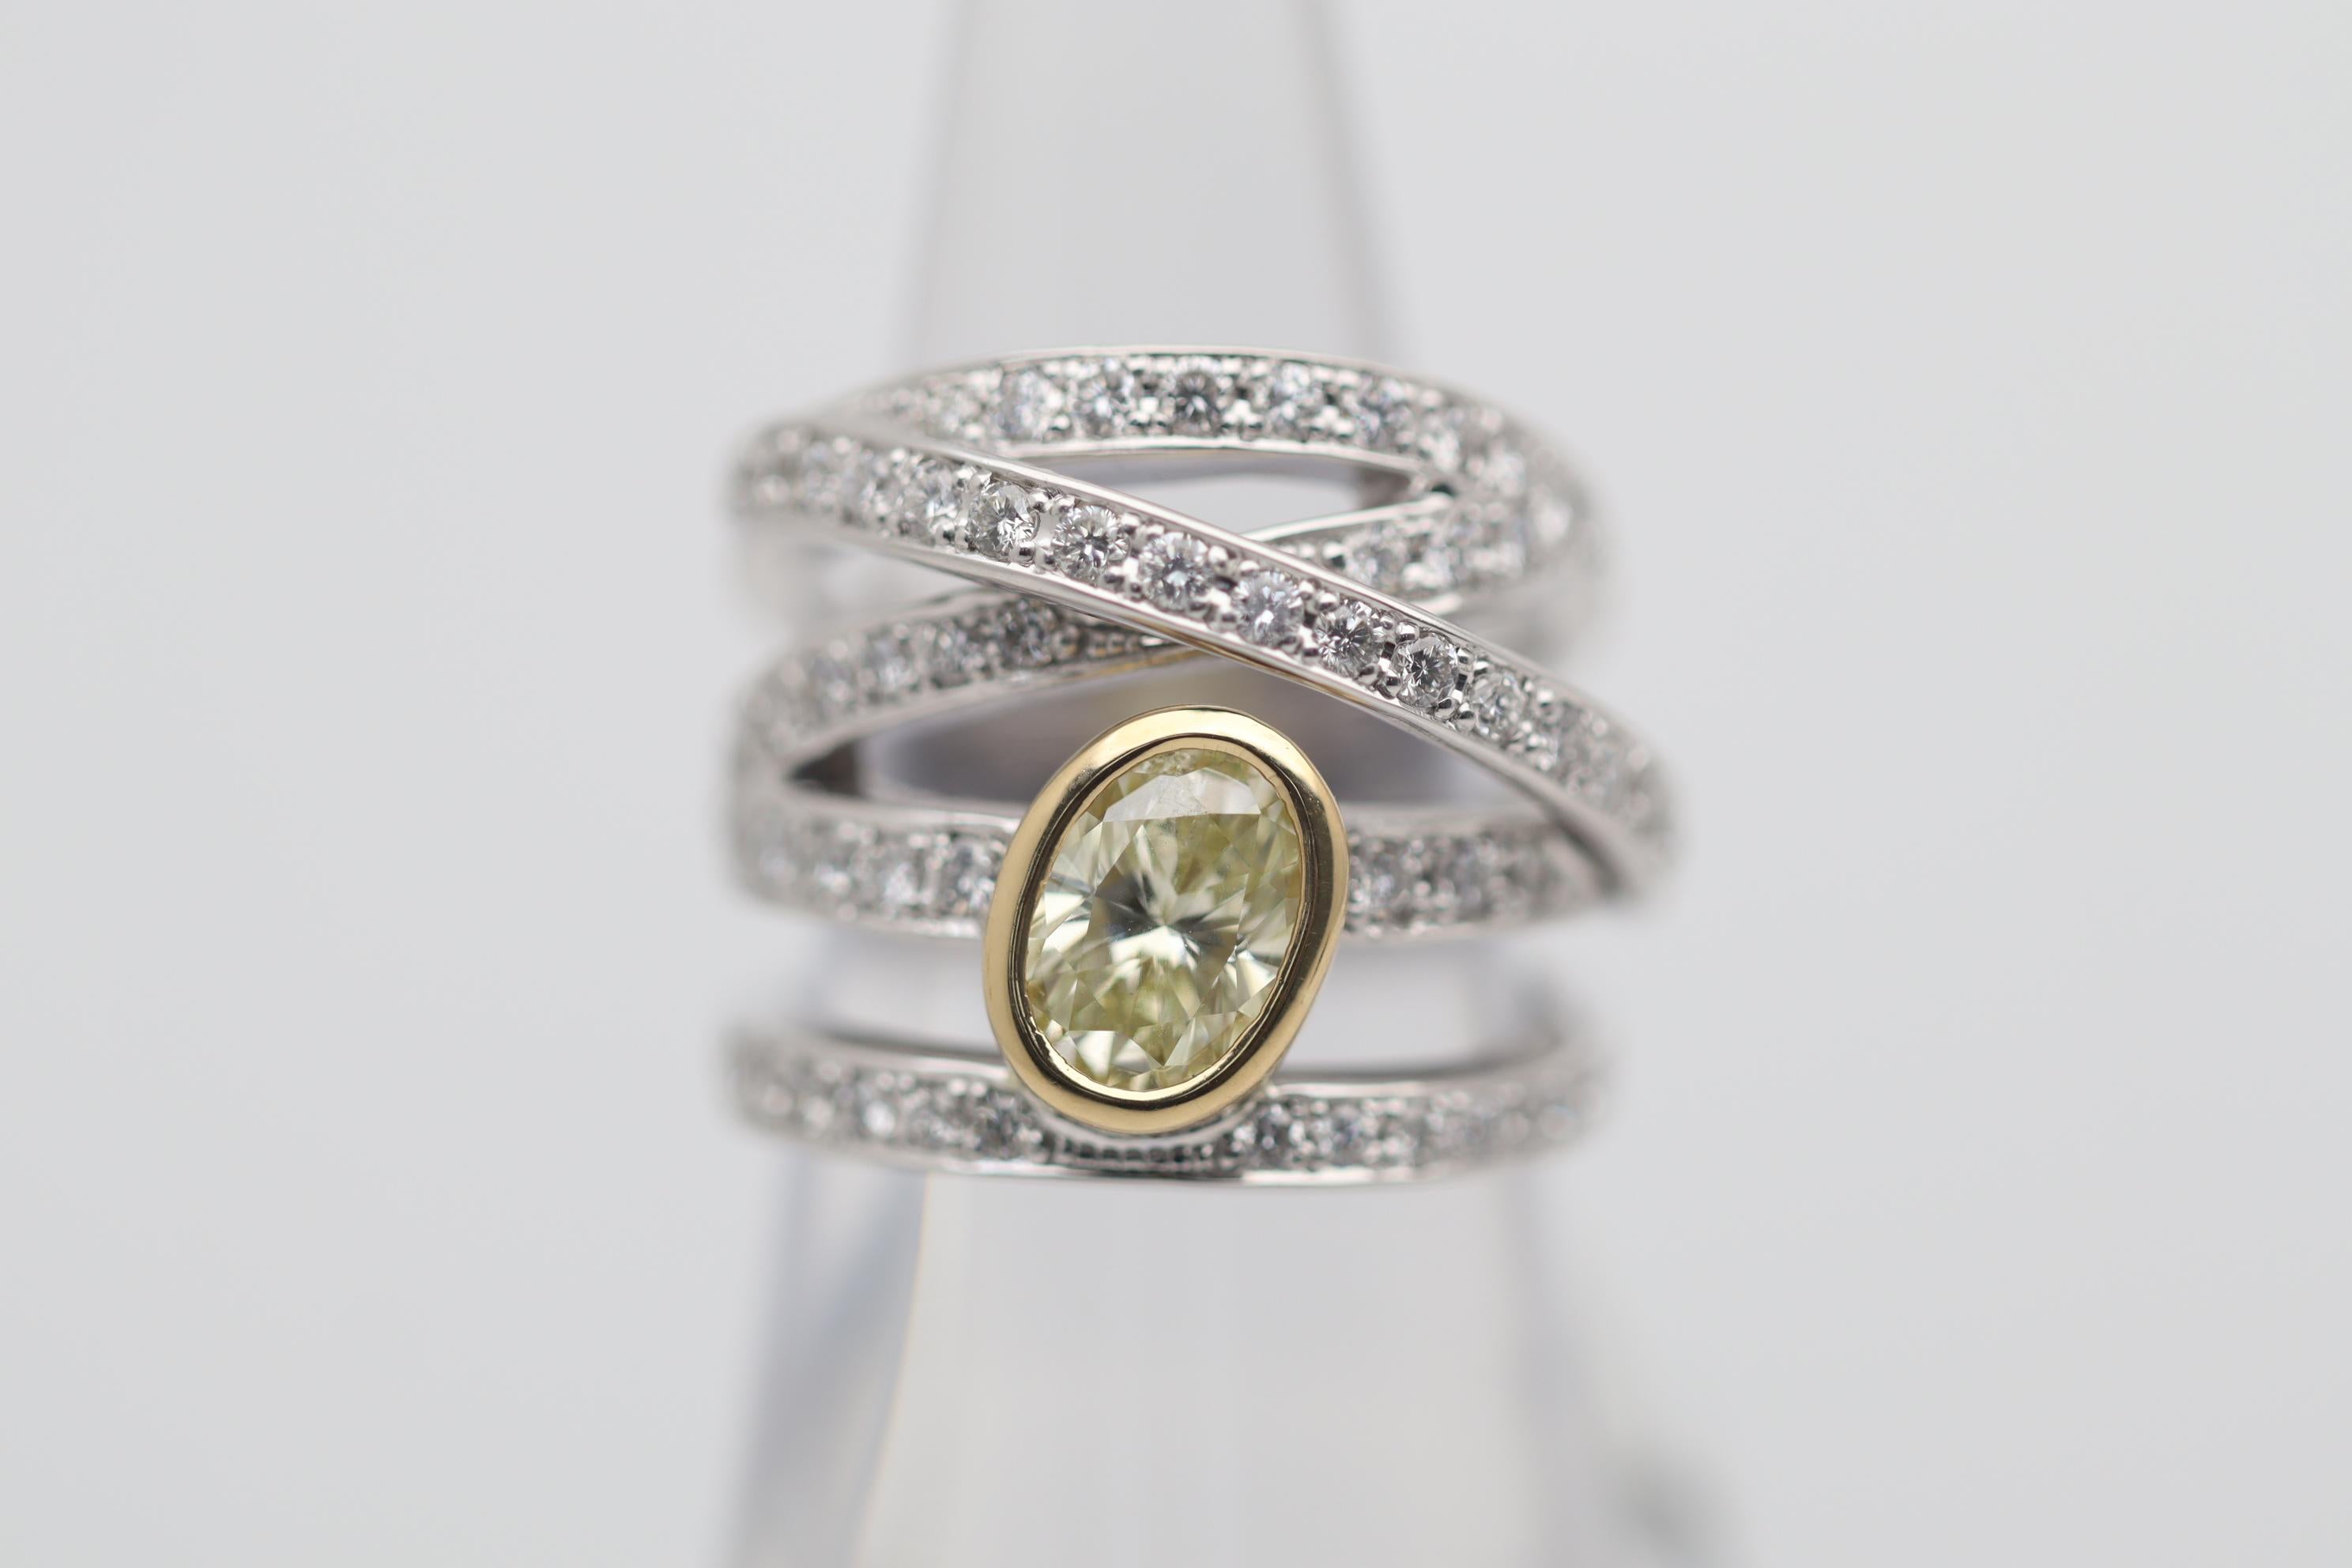 A fun and stylish ring featuring a 1.23 carat fancy yellow diamond. It has a beautiful oval shape and is bezel set in 18k yellow gold to help complement the stones natural color. Adding to that, are 1.18 carats of bright white round brilliant-cut